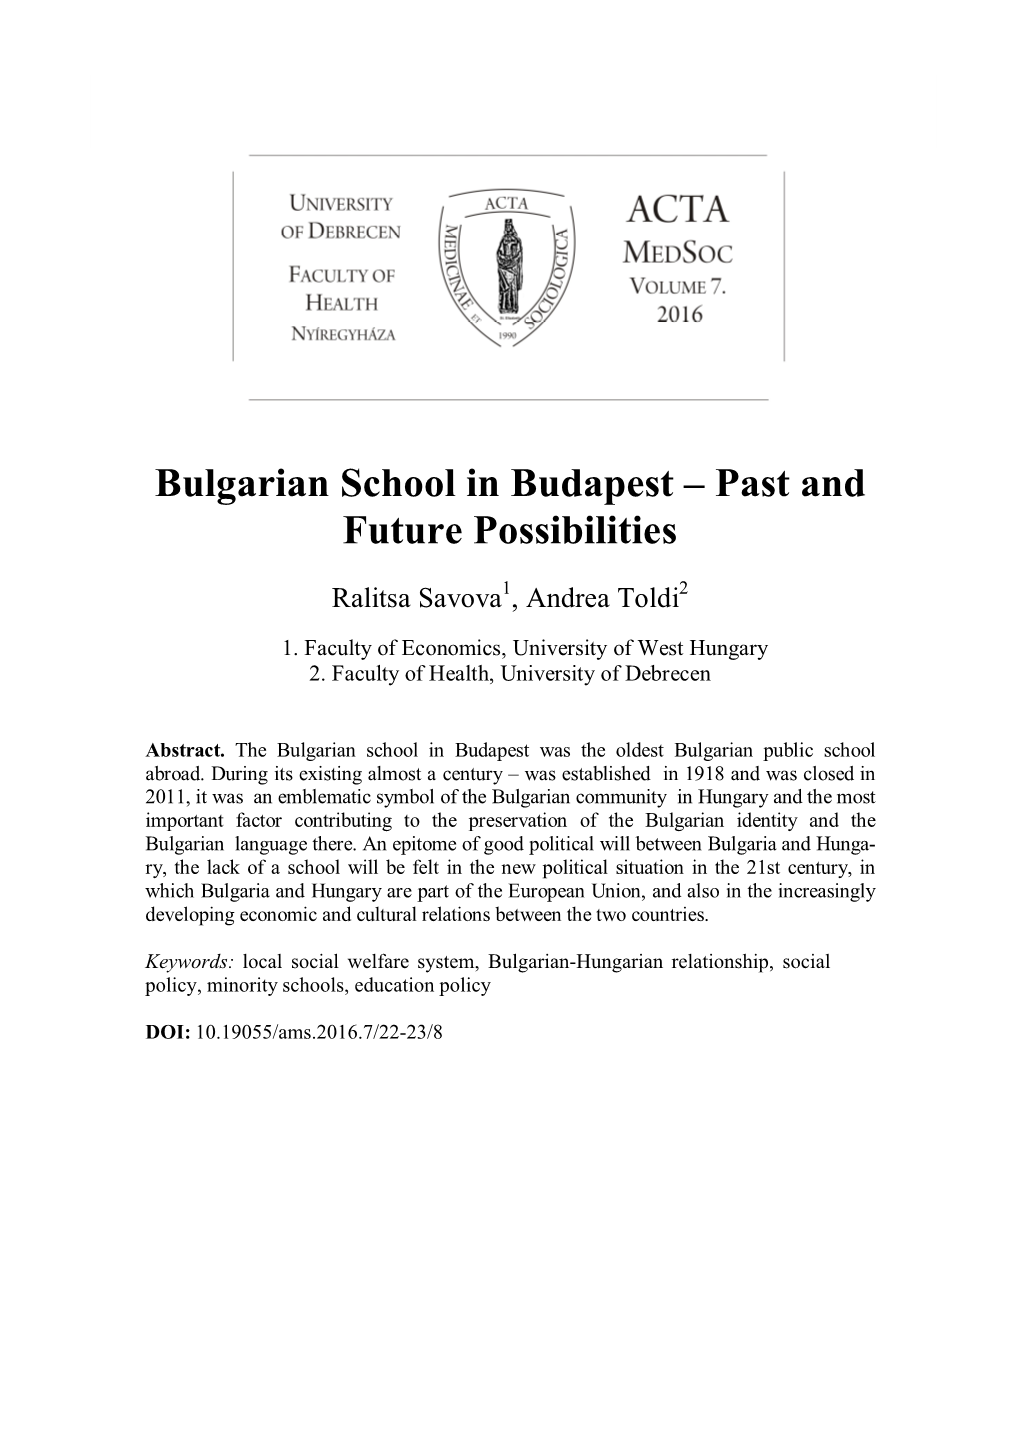 Bulgarian School in Budapest – Past and Future Possibilities